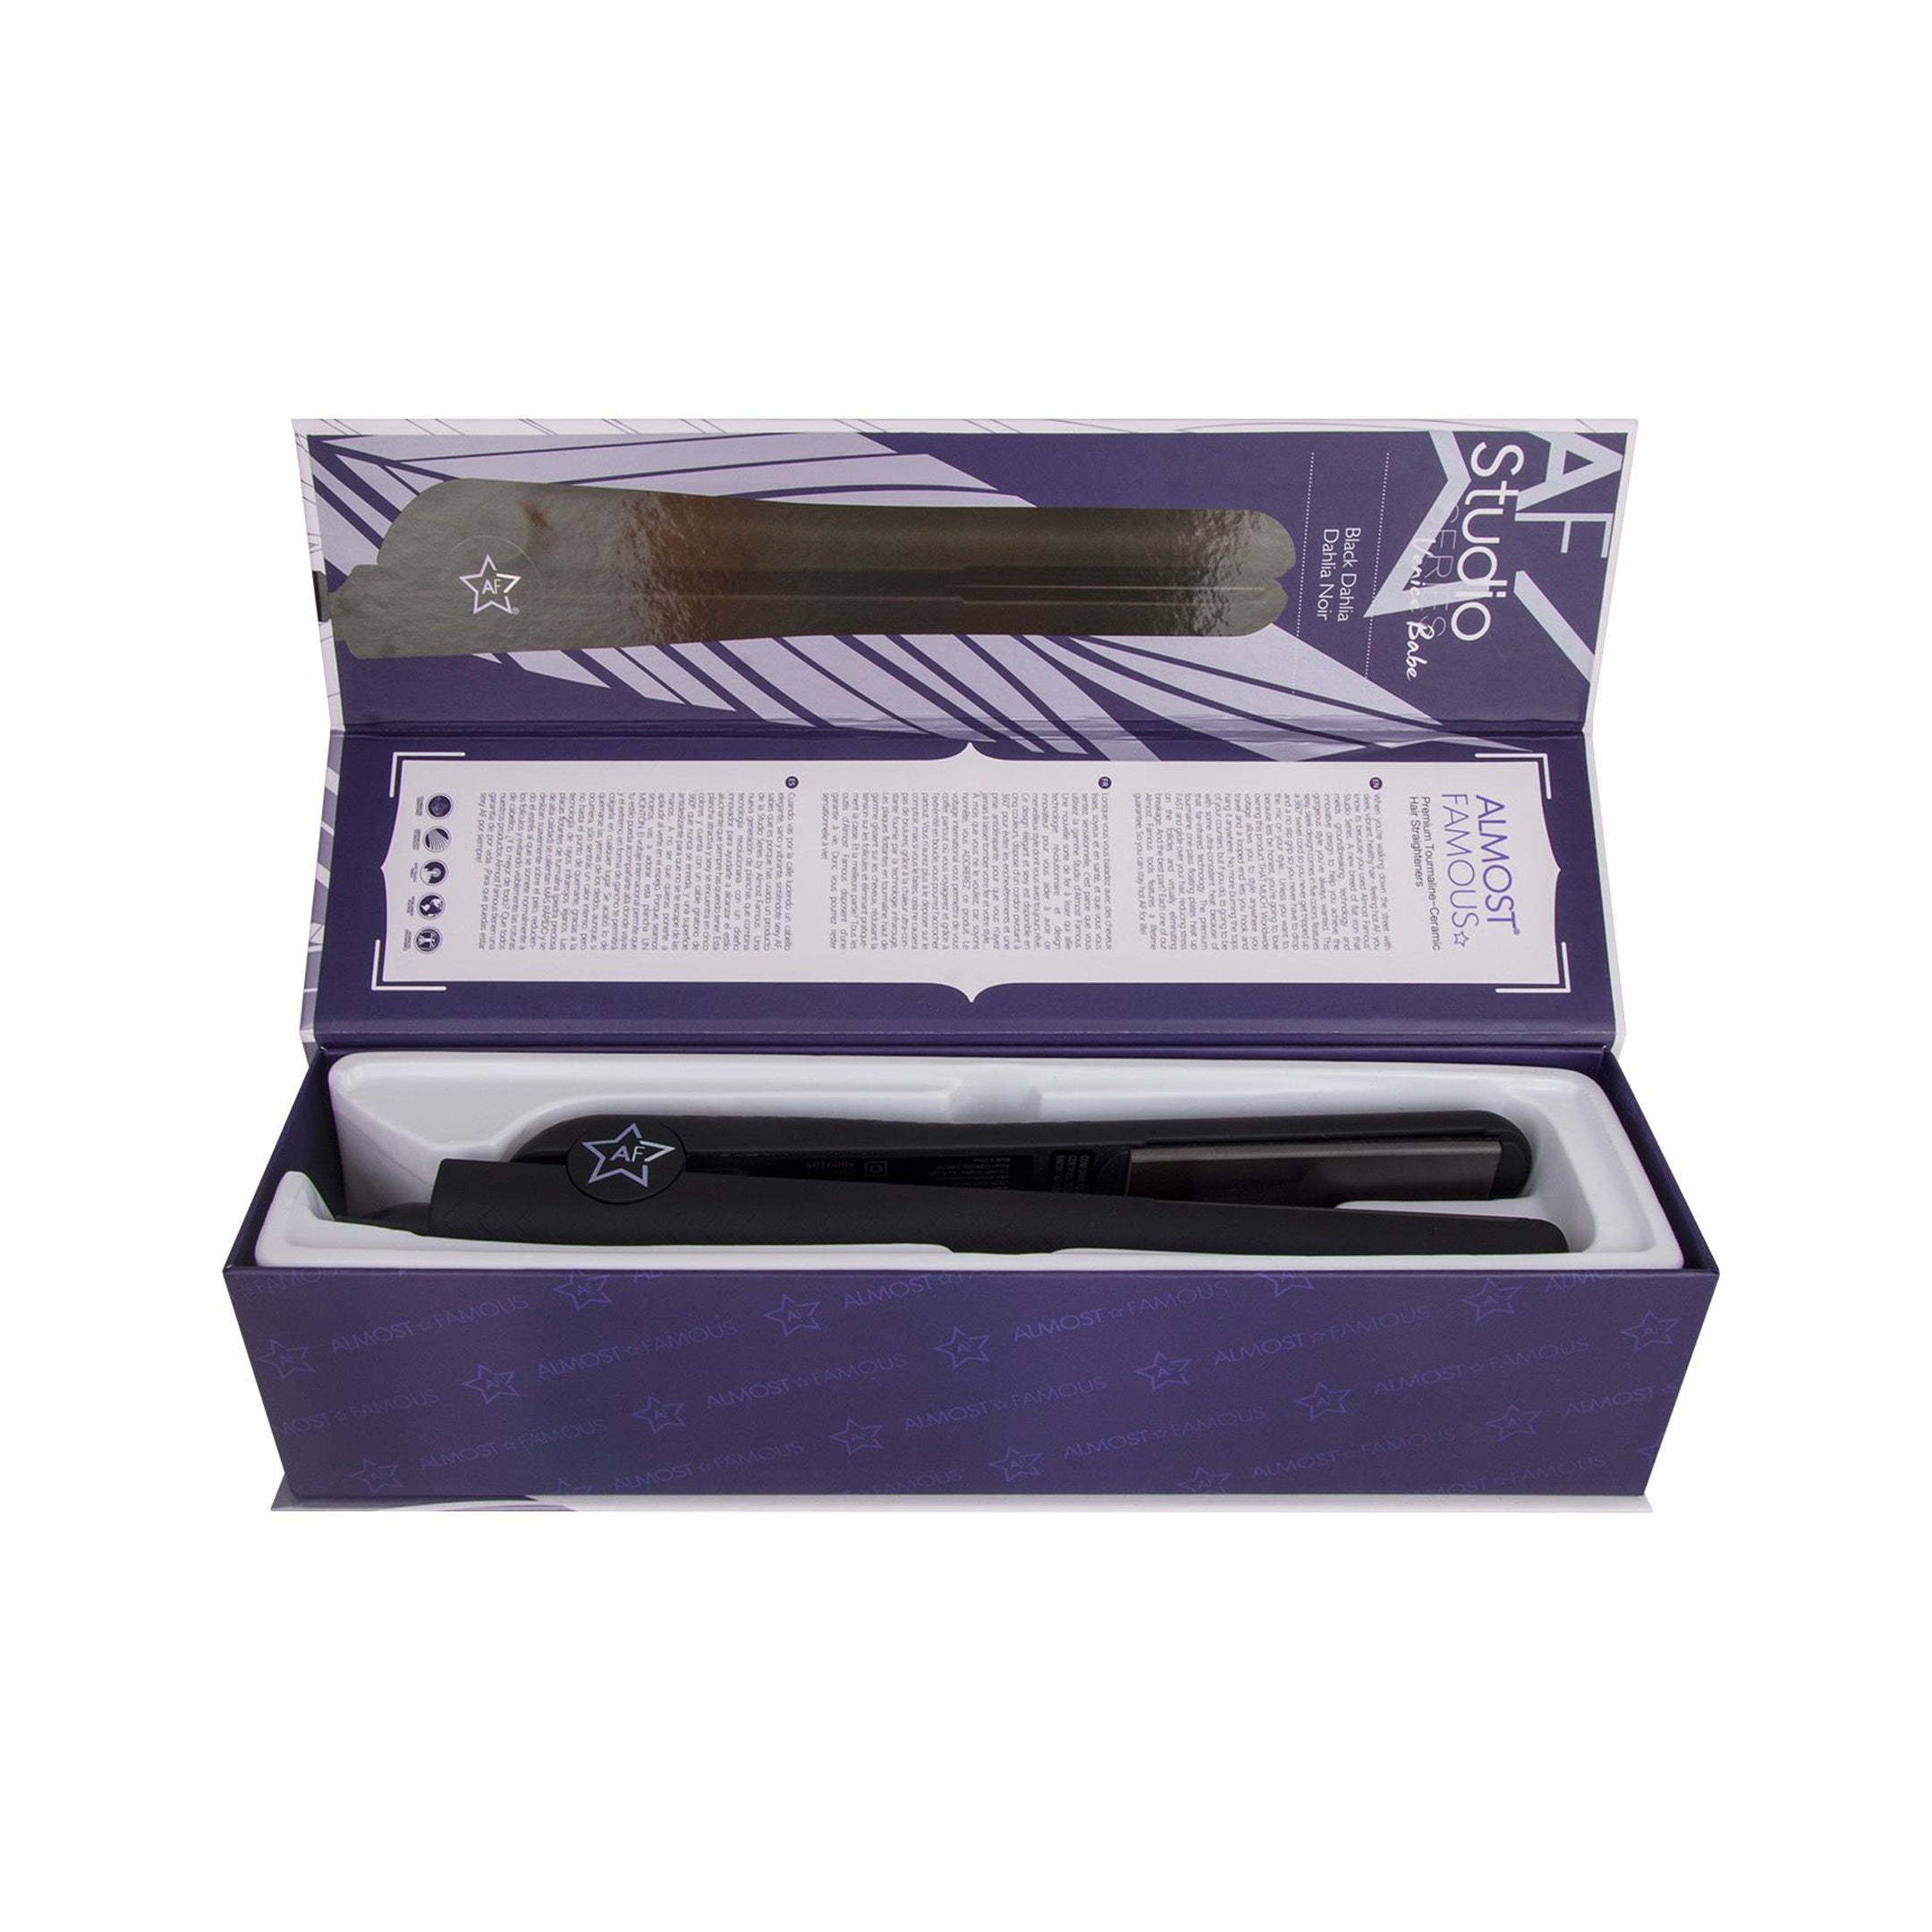 Venice Babe 1.25" Flat Iron with Luxe Gem Infused Plates